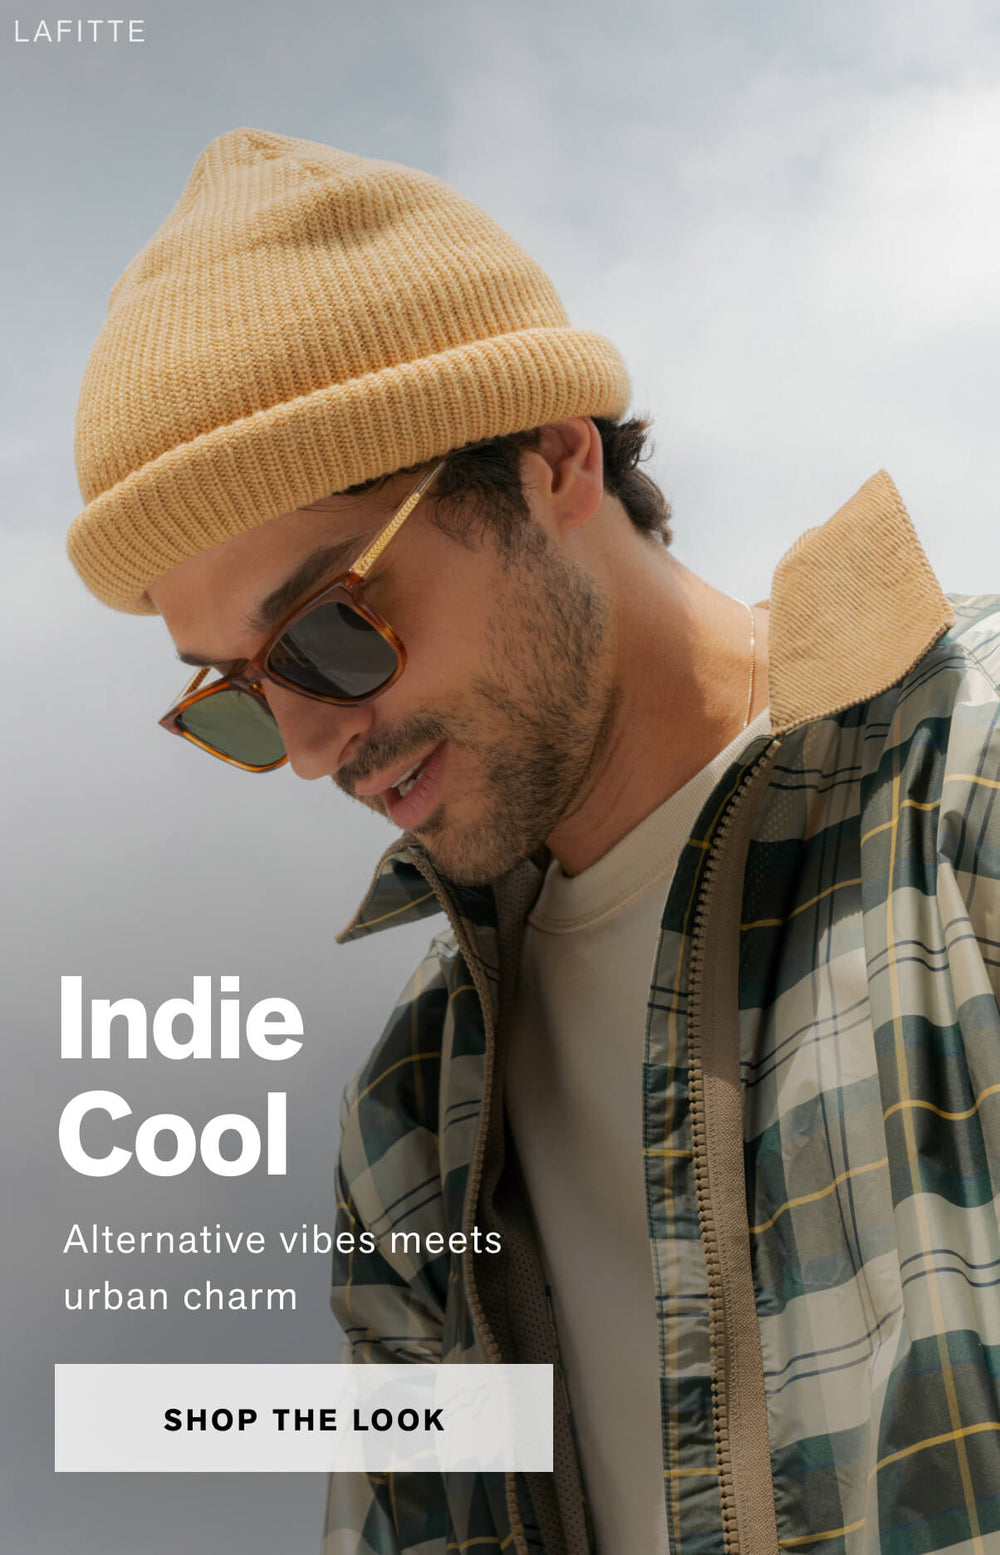 INDIE COOL ALTERNATIVE VIBES MEETS URBAN CHARM  SHOP THE LOOK